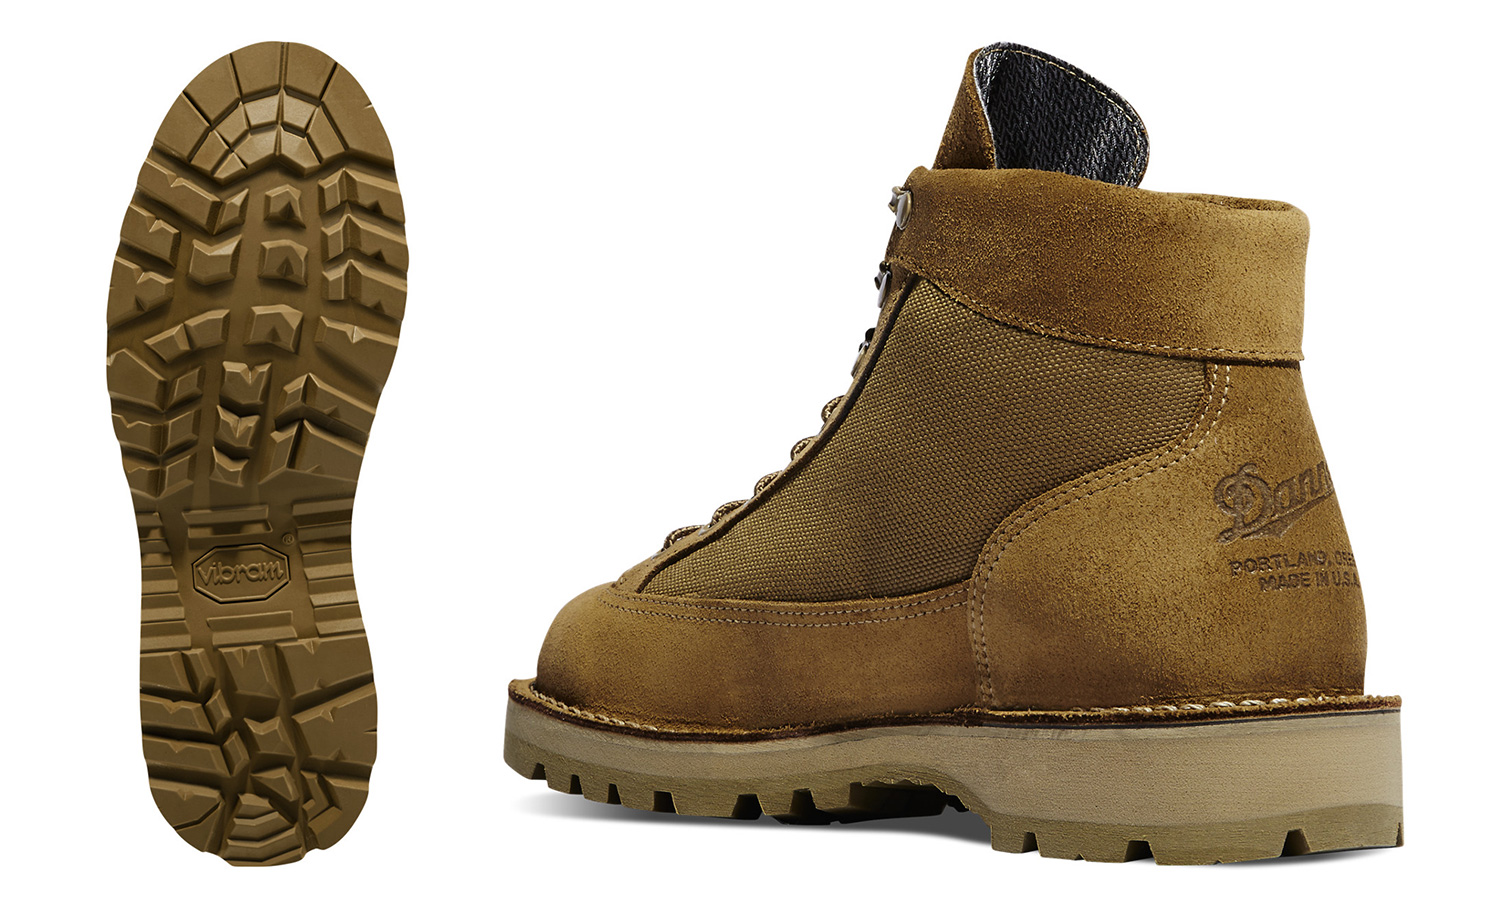 Hands-On Review of Best Hiking Boot Danner Light | Field Mag